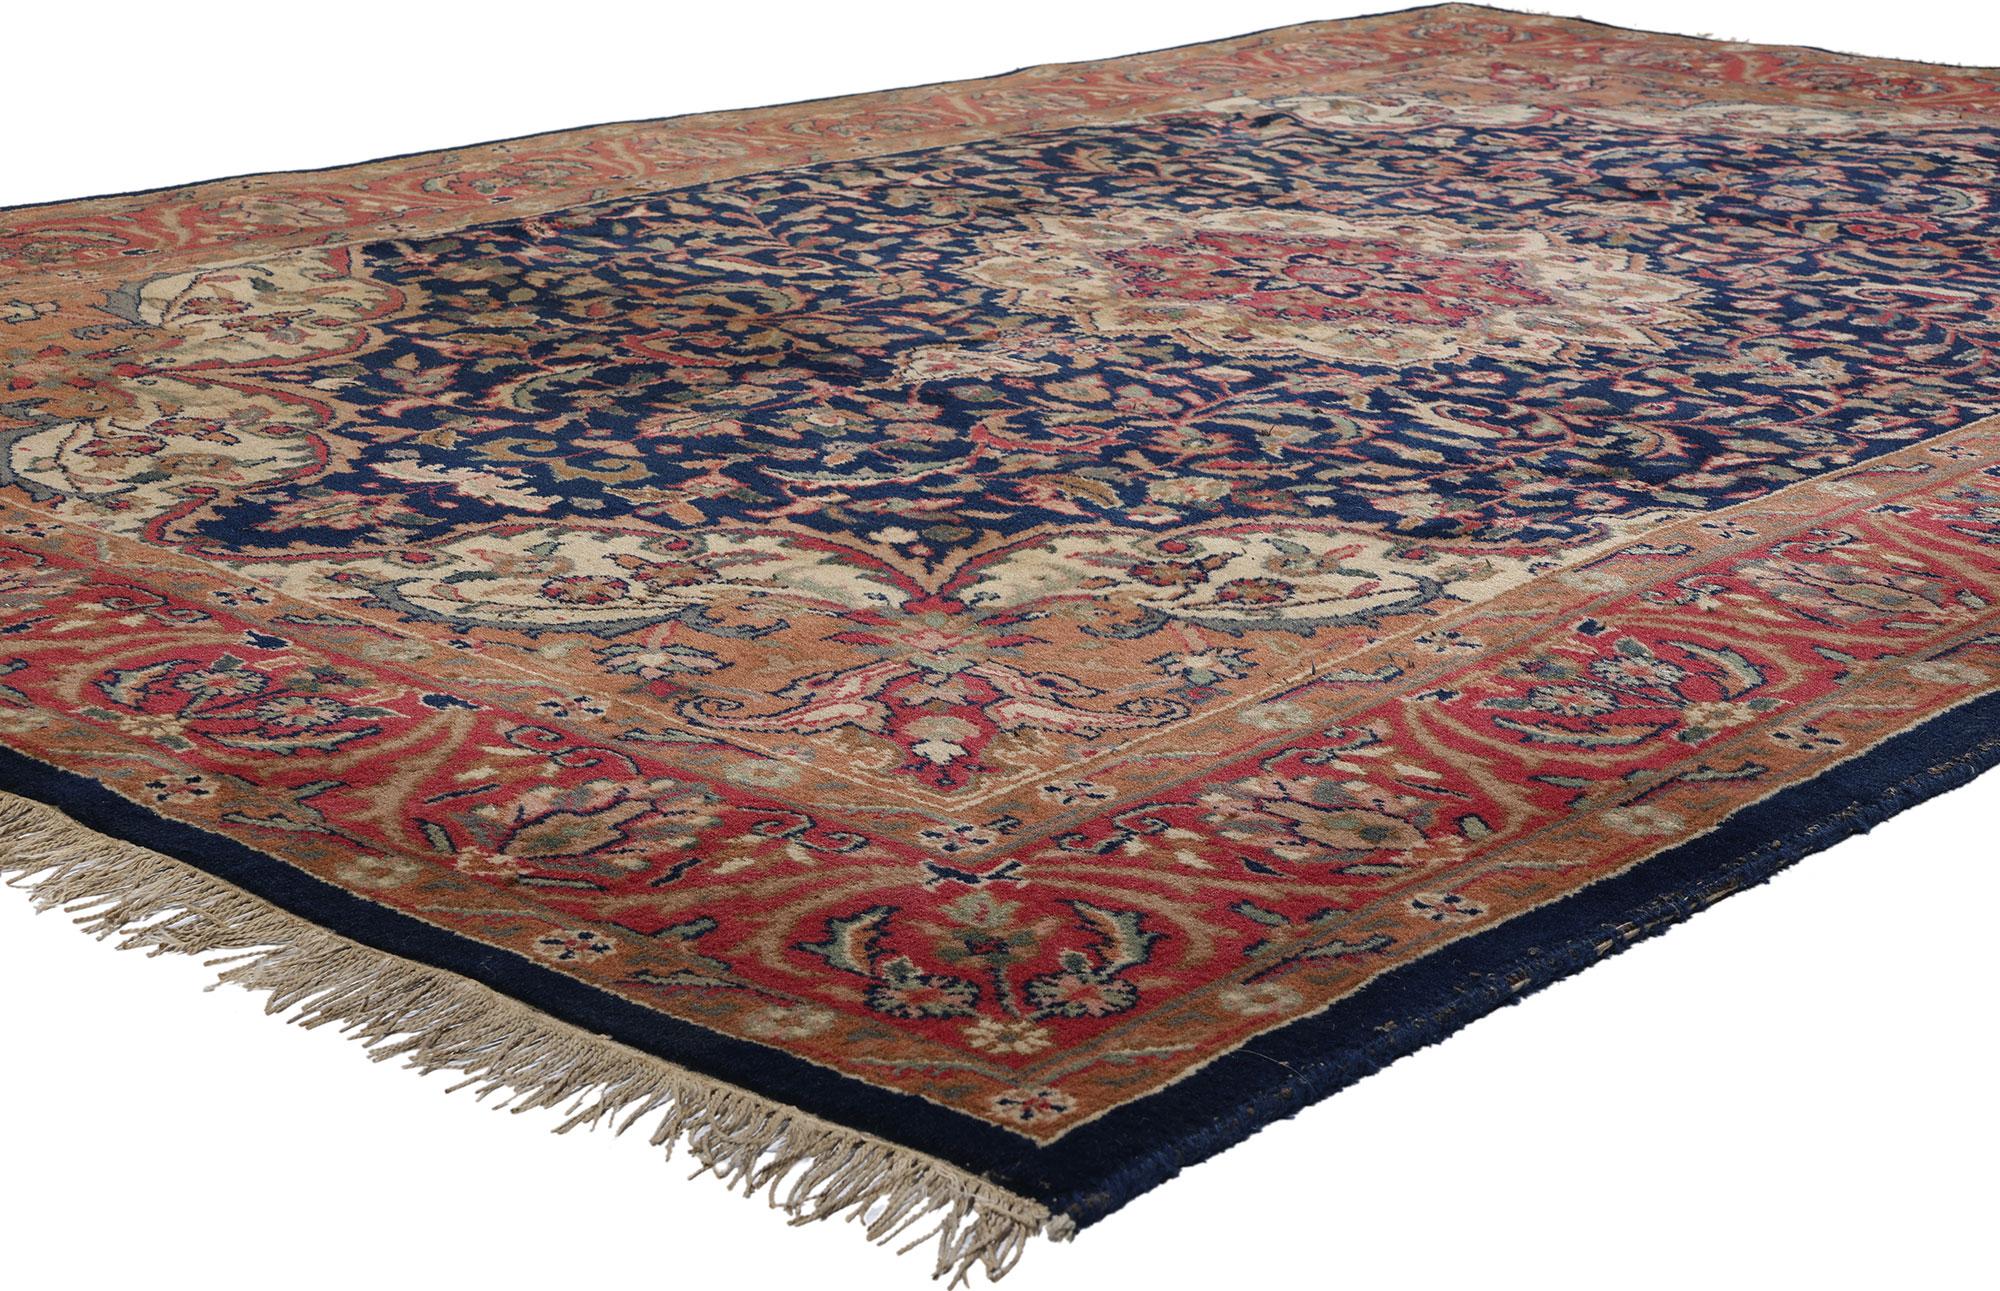 78690 Vintage Indian Isfahan Rug, 05'09 x 09'00. Step into the realm of timeless elegance with this exquisite hand-knotted wool Indian Isfahan rug, where opulence meets tradition in every meticulously woven thread. At its heart lies a captivating